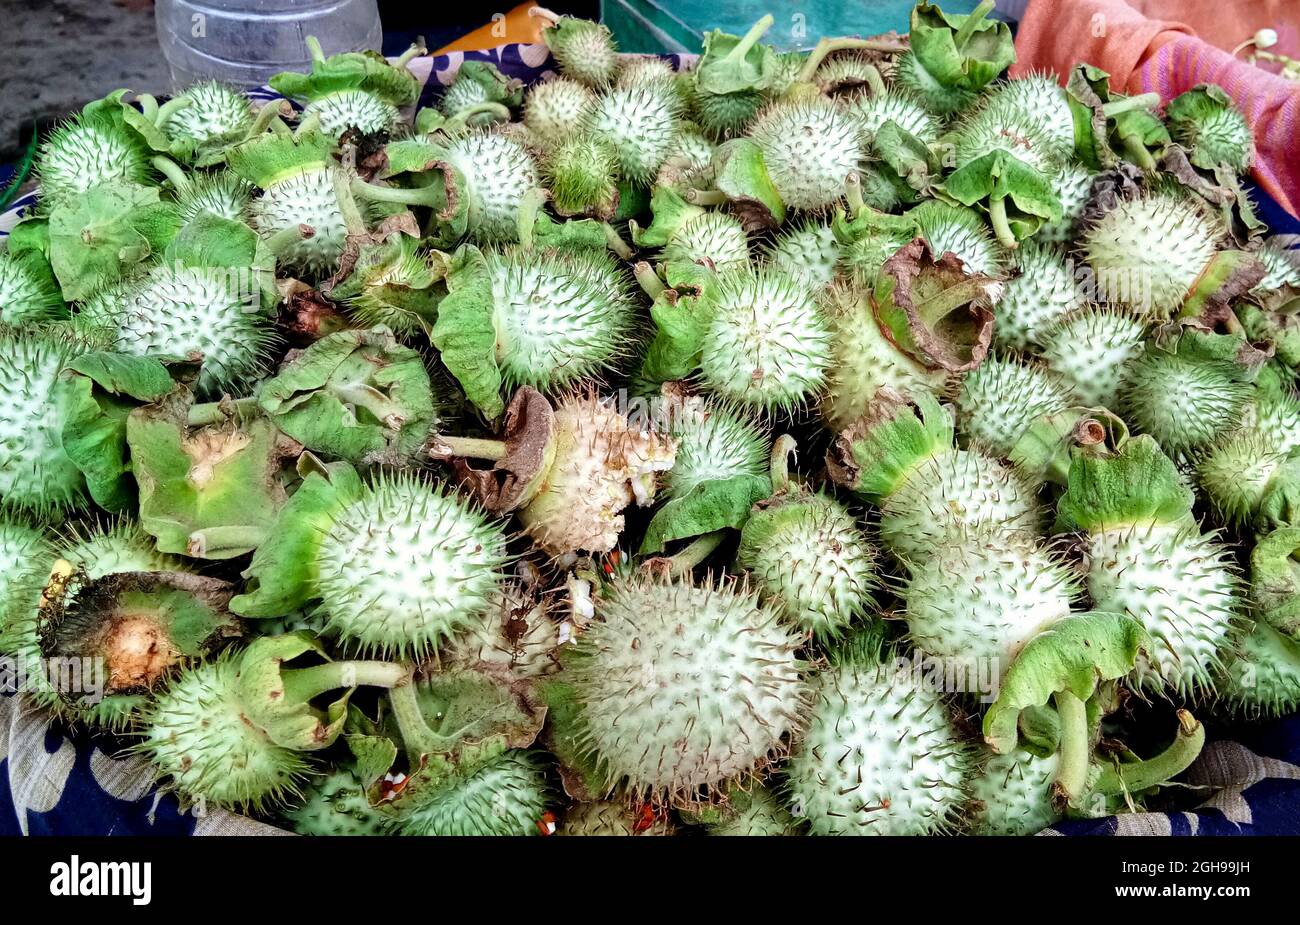 Datura innoxia green fruit. It also known as Datura wrightii or sacred datura. Hindu datura metel in the period of fruiting Stock Photo